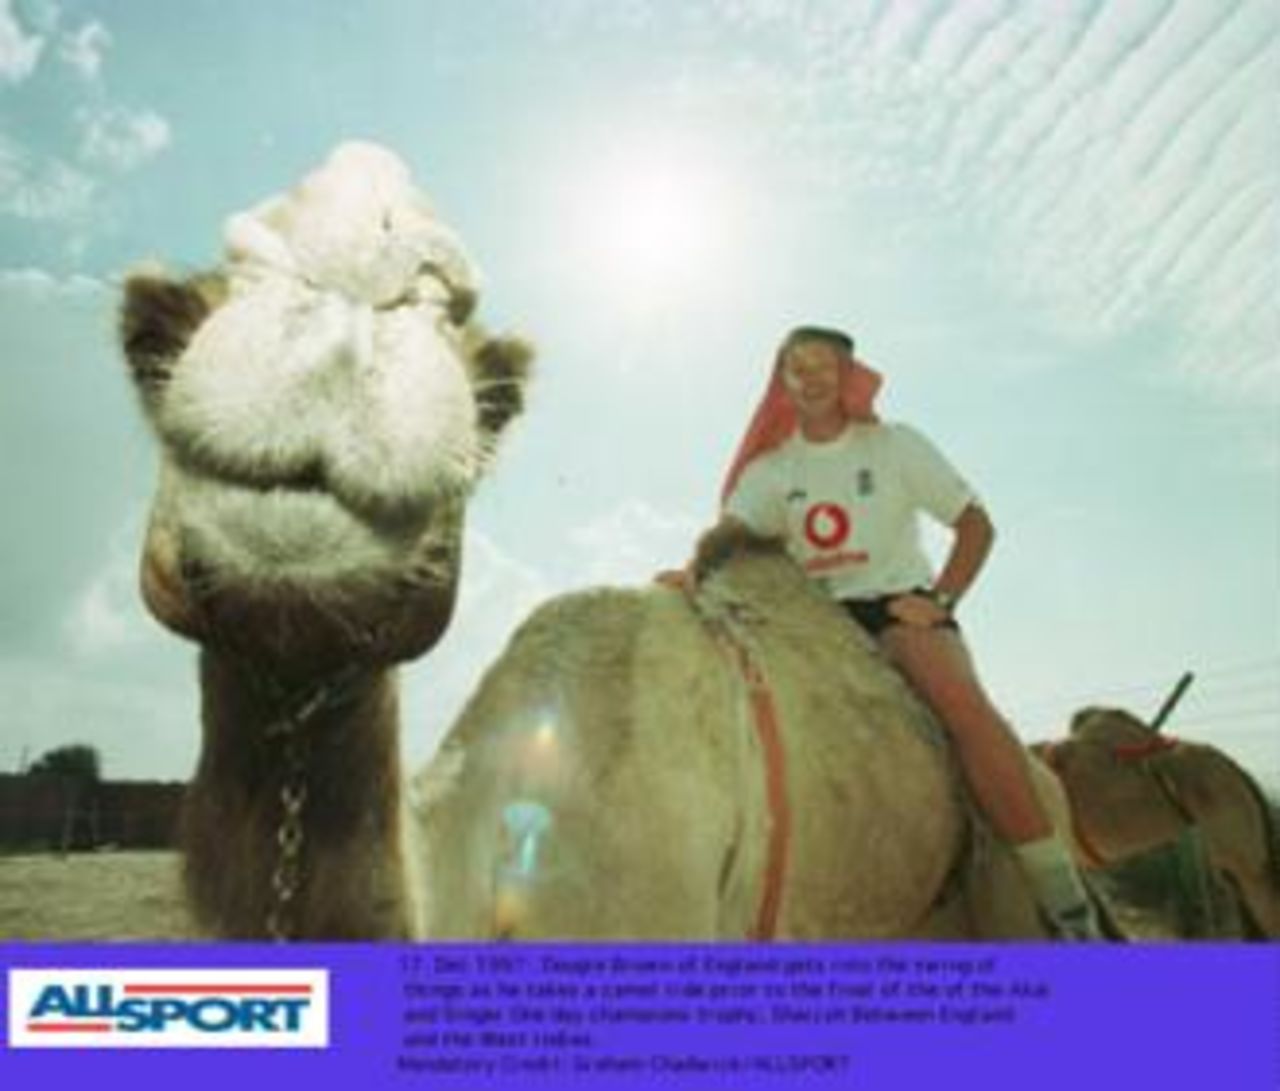 Dougie Brown riding on a camel prior to the final of the Champions Trophy in Sharjah between England and West Indies